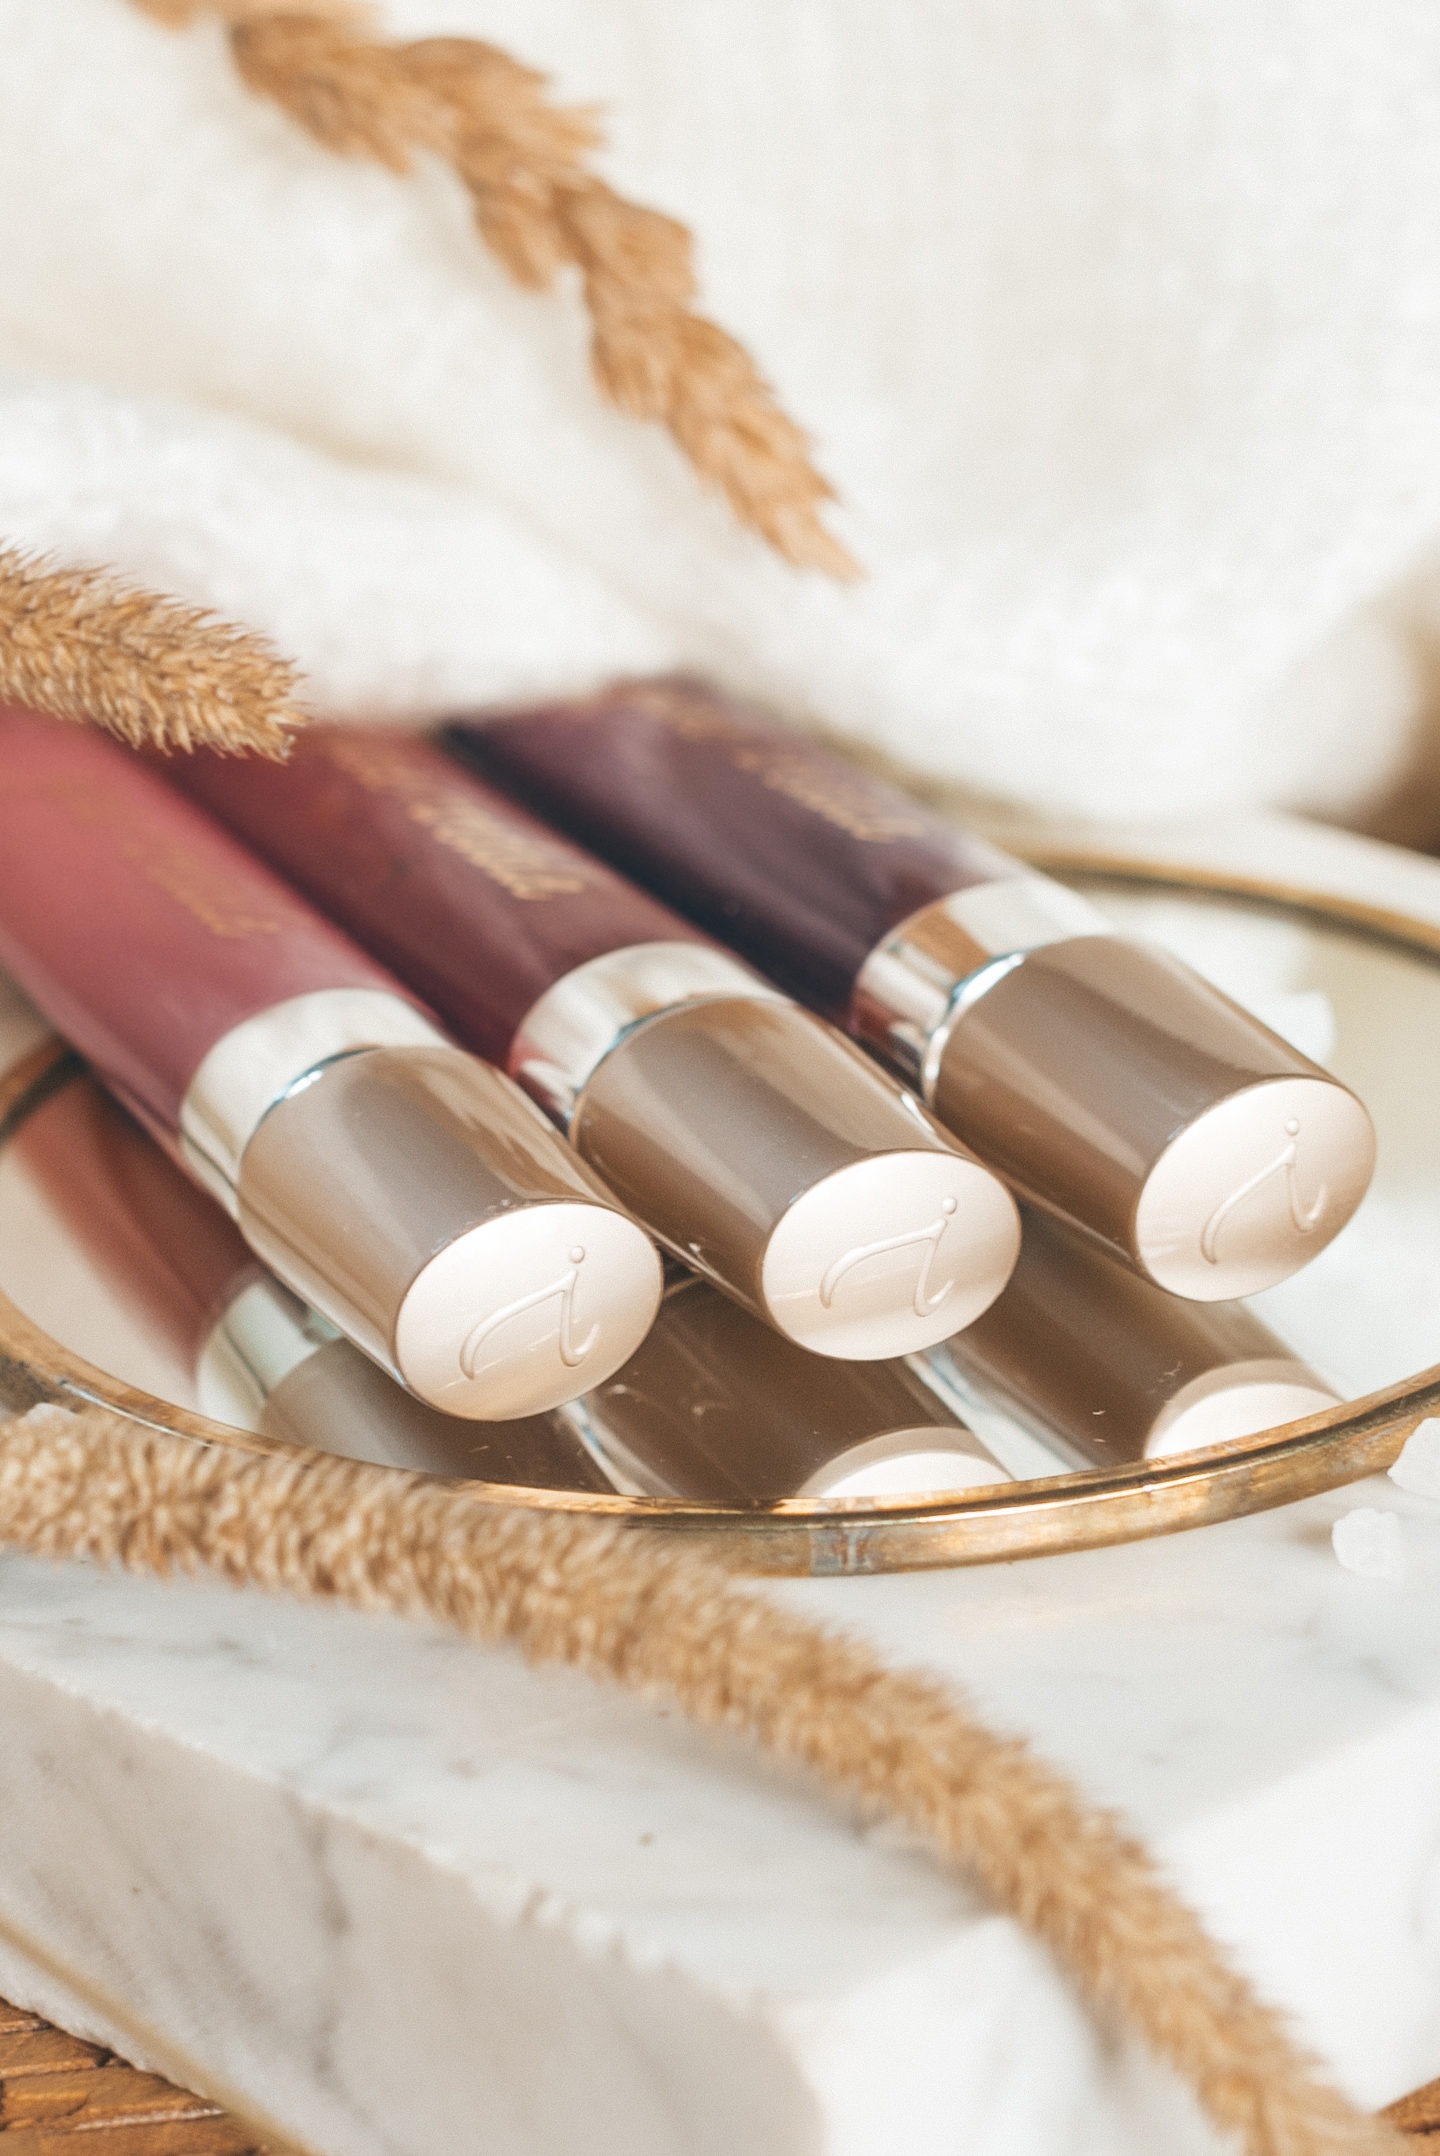  Shades for Fall-collectie jane iredale herfstcollectie 2018